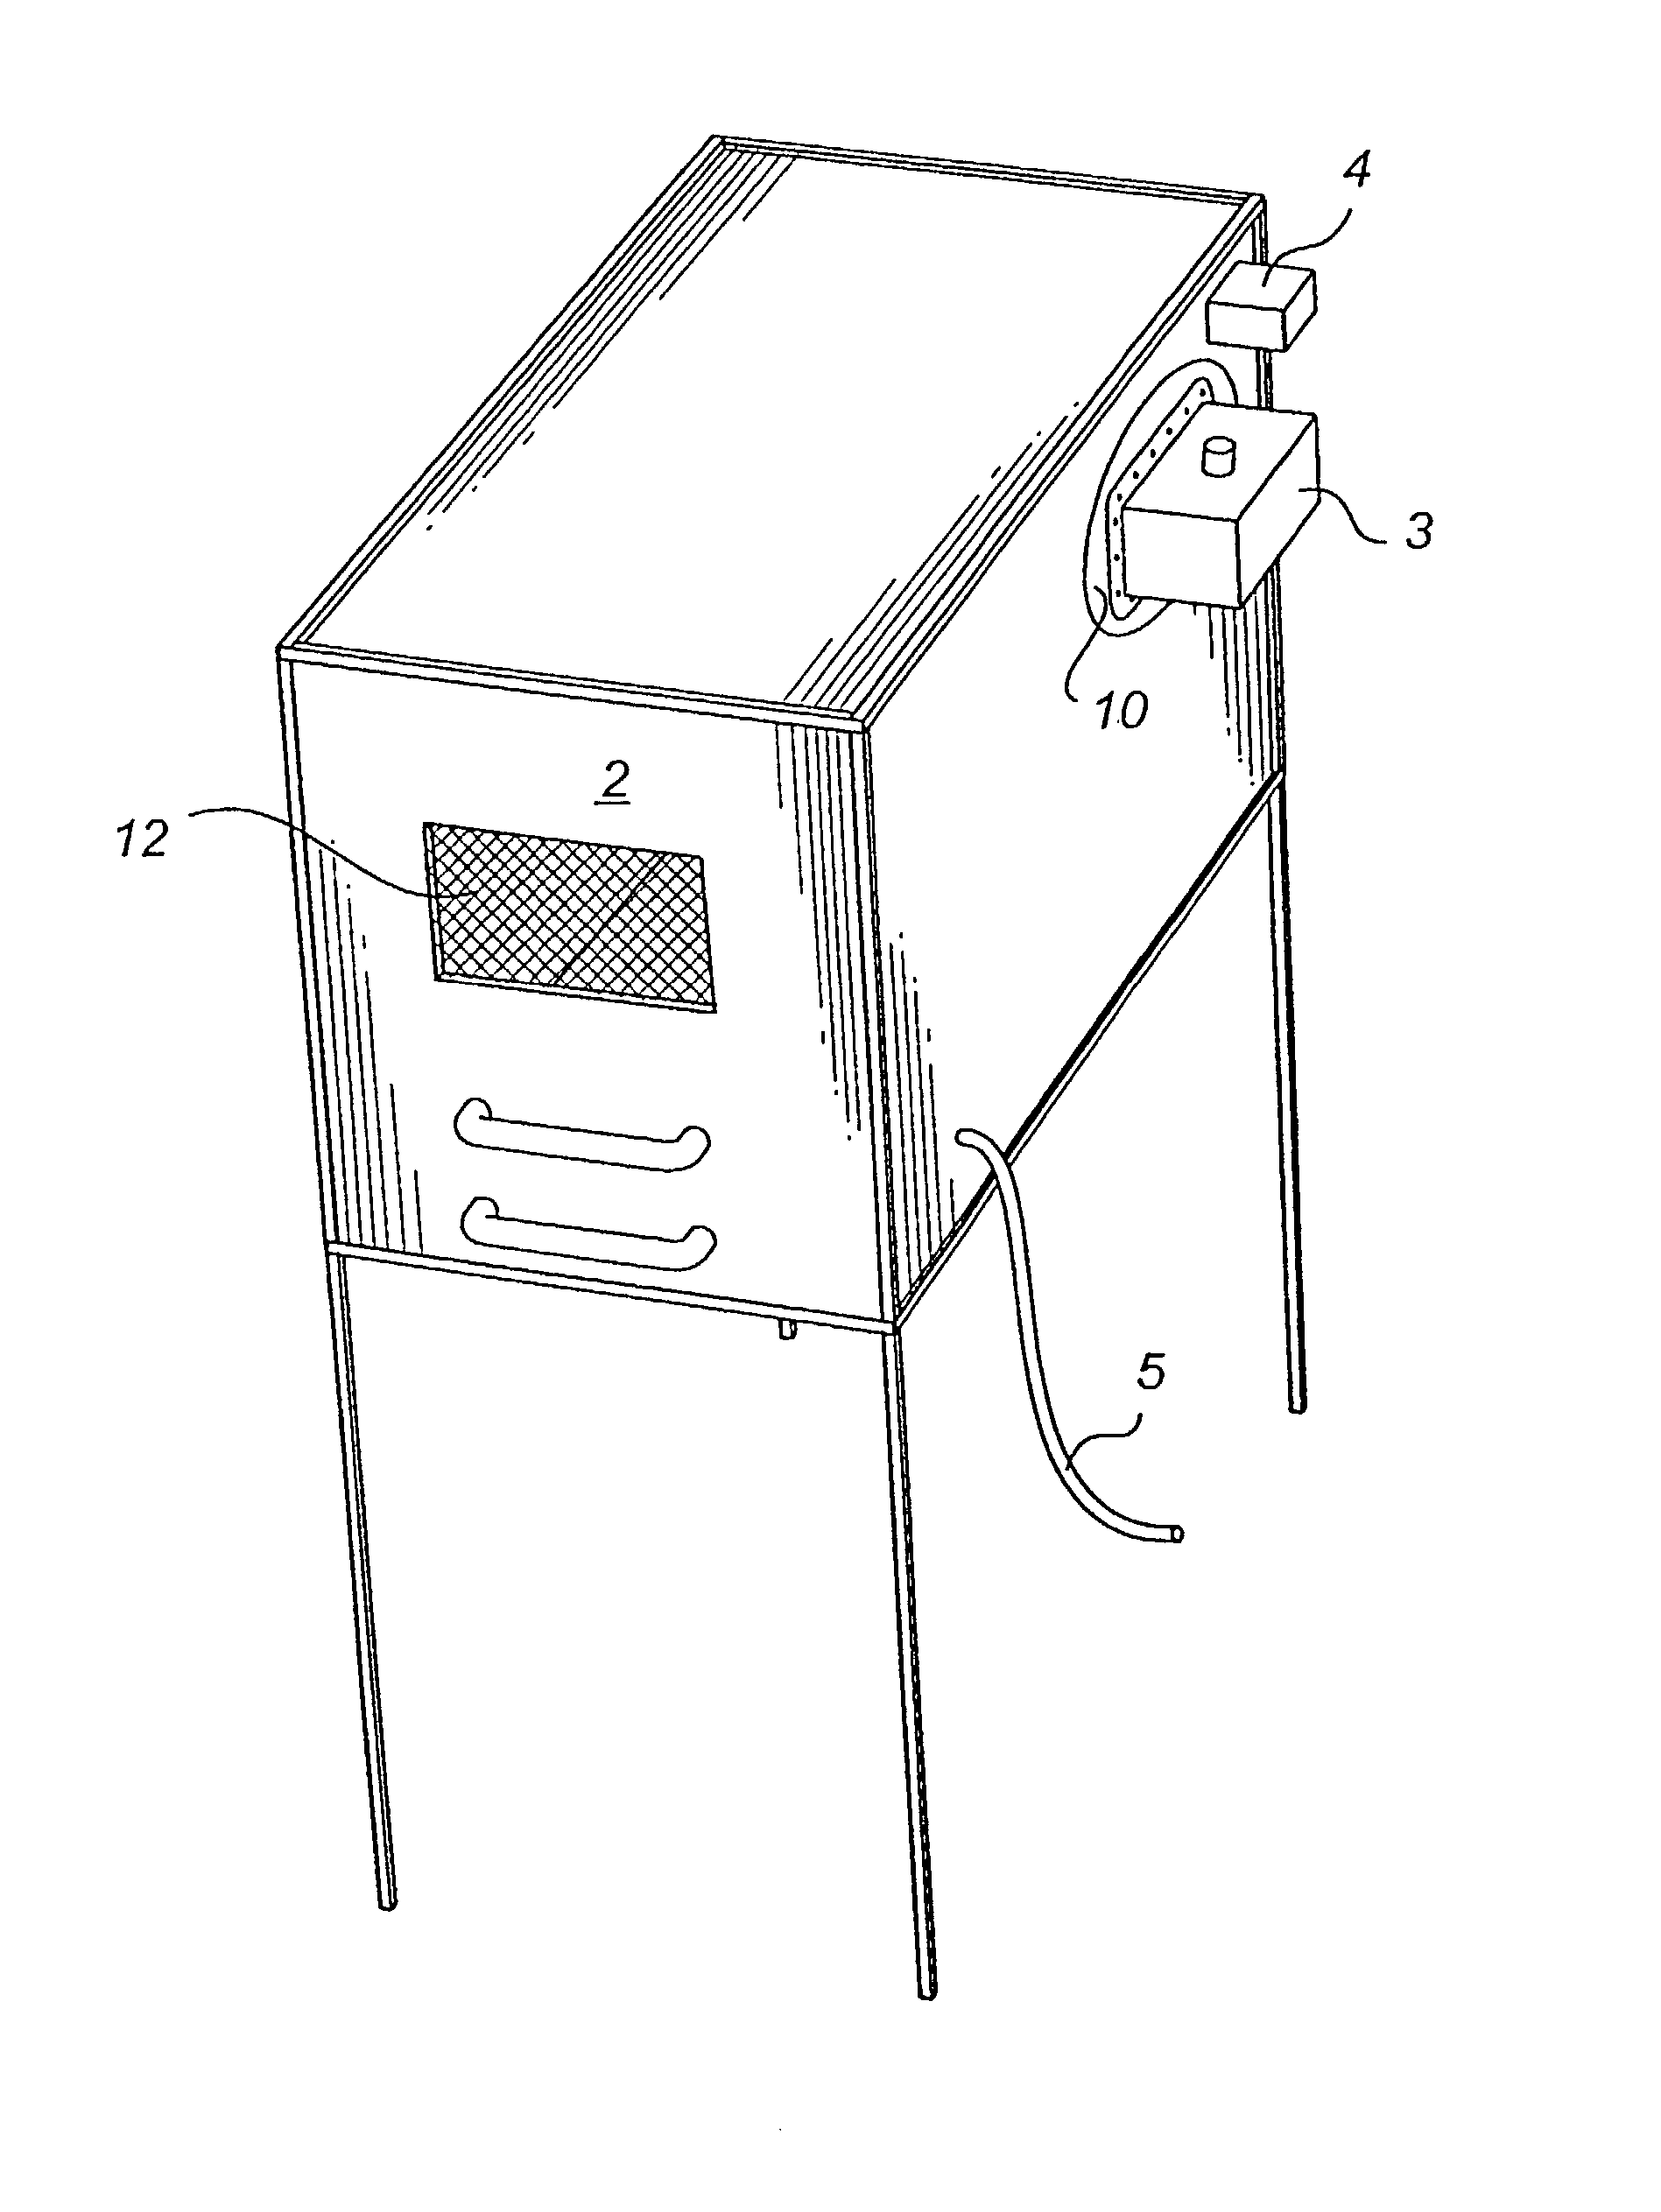 Method and an apparatus for measuring the performance of antennas, mobile phones and other wireless terminals